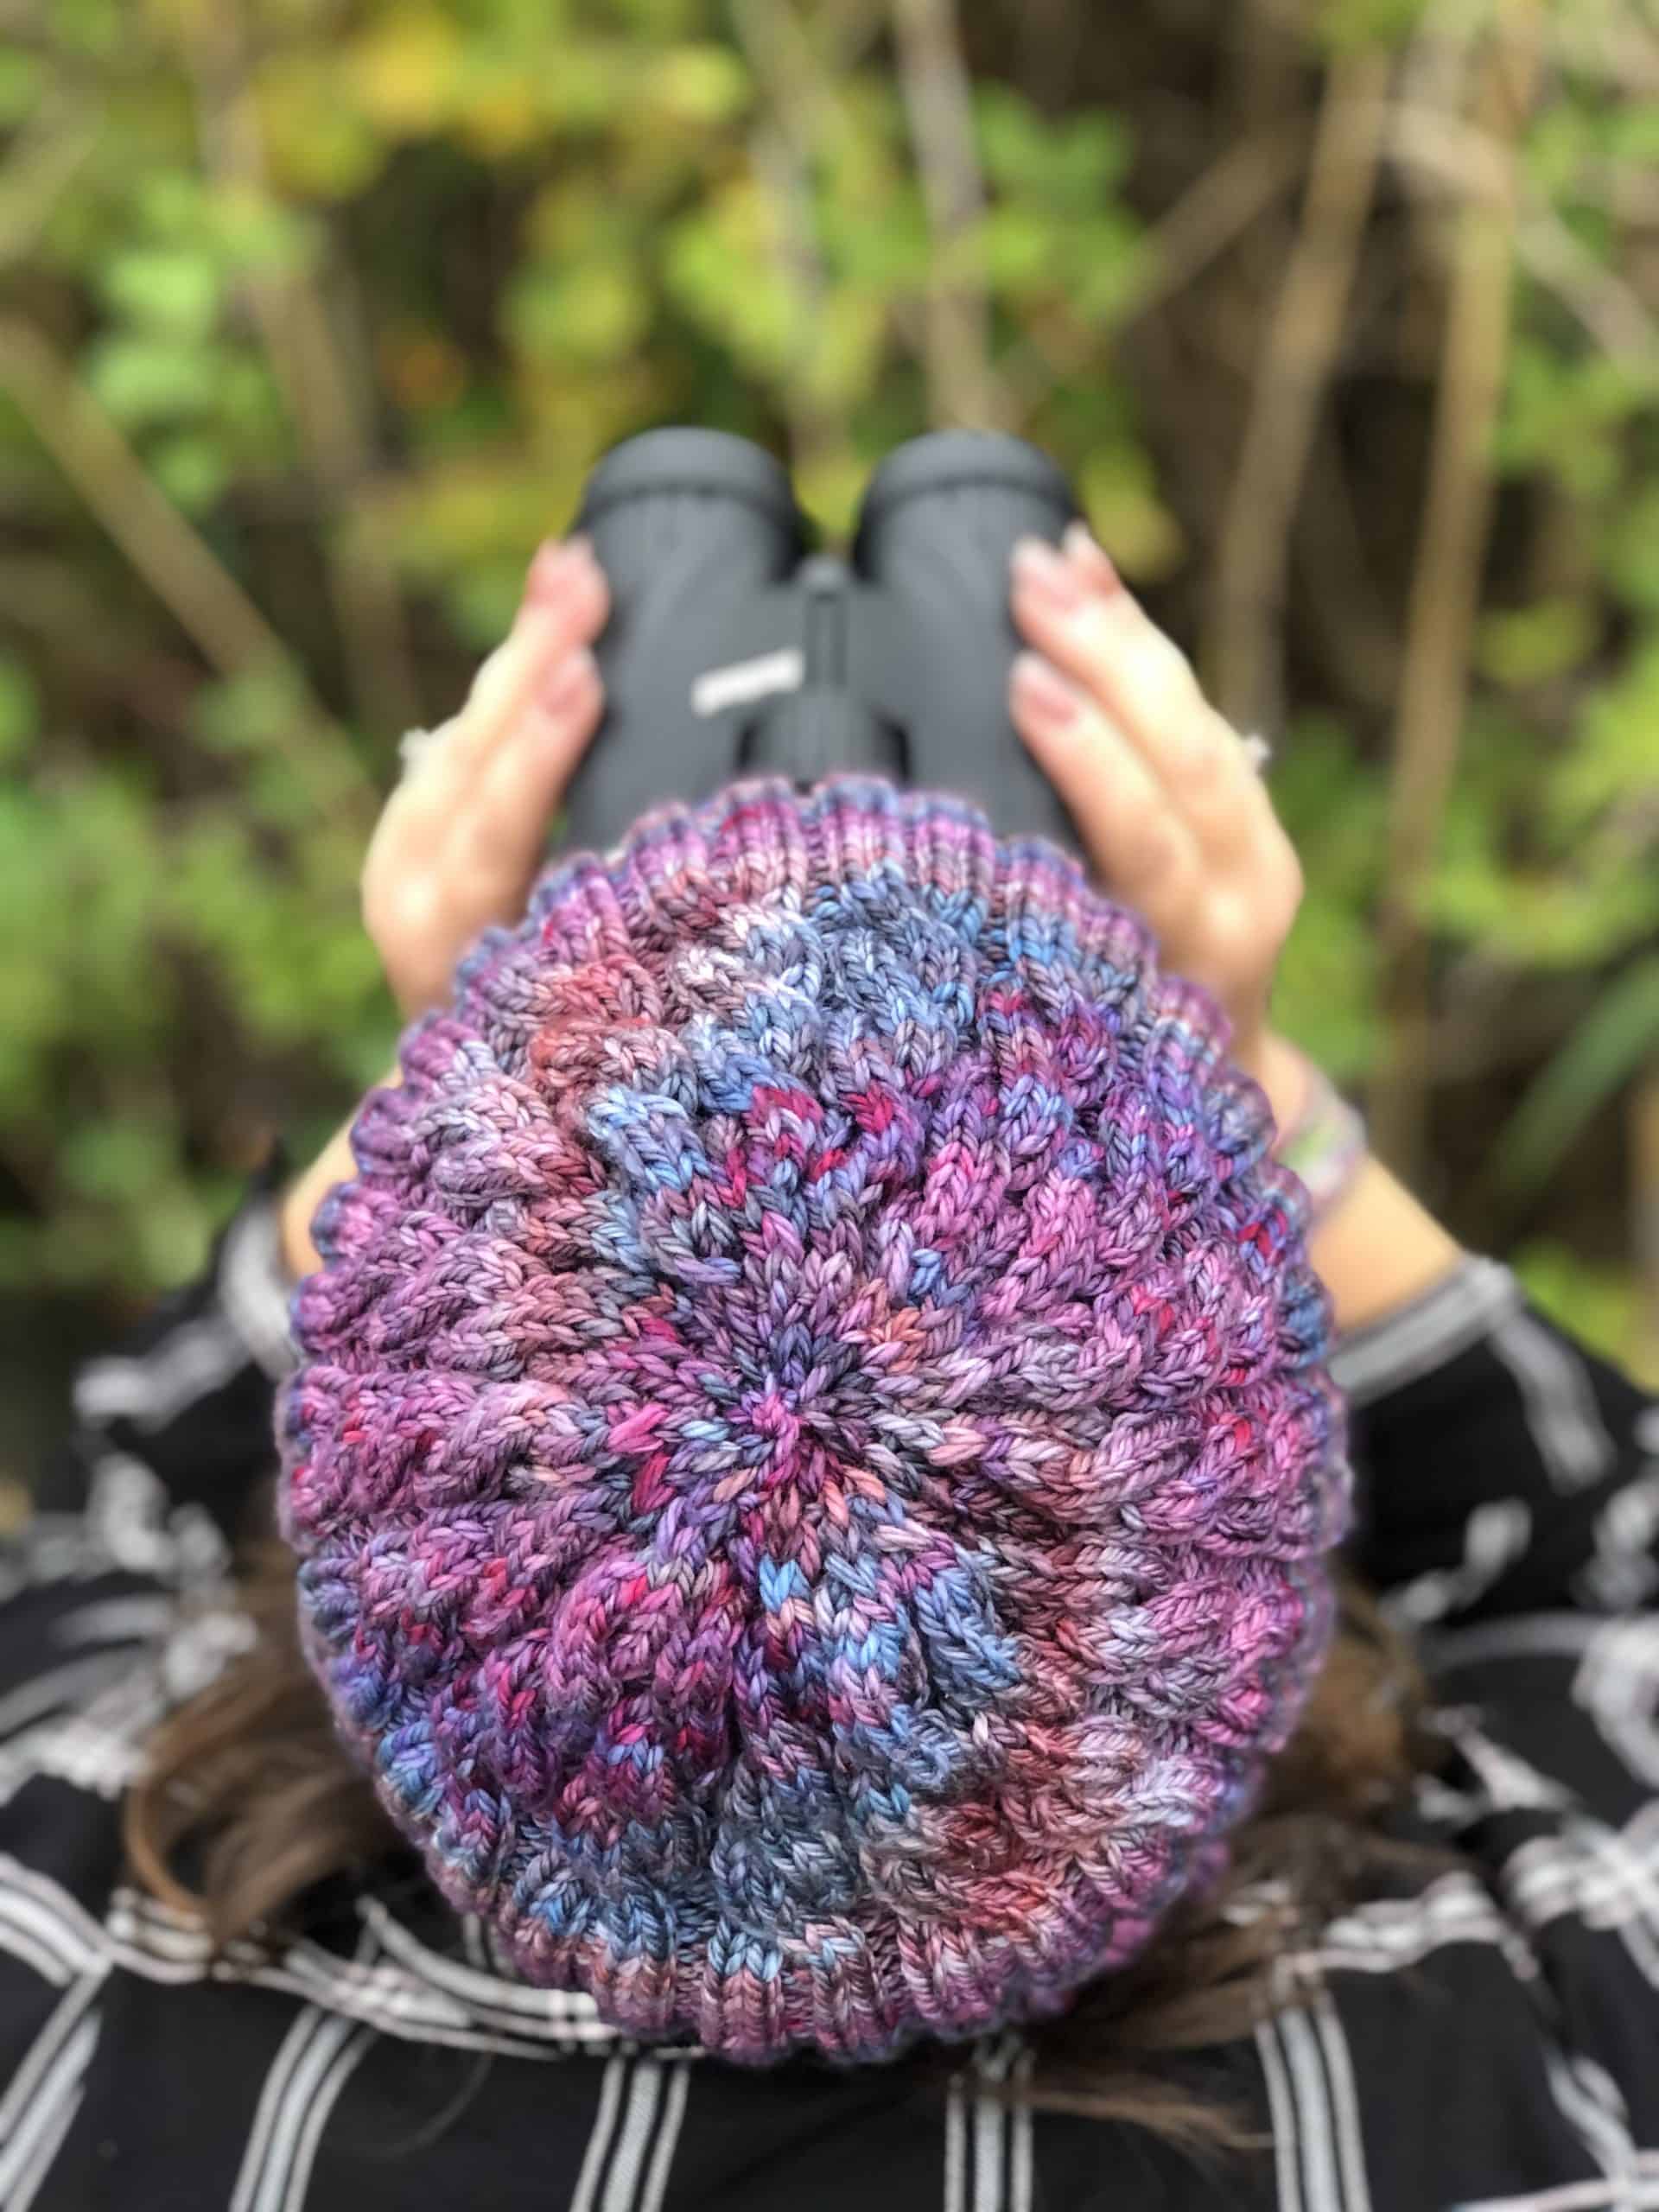 The top of a purple and blue knit hat.